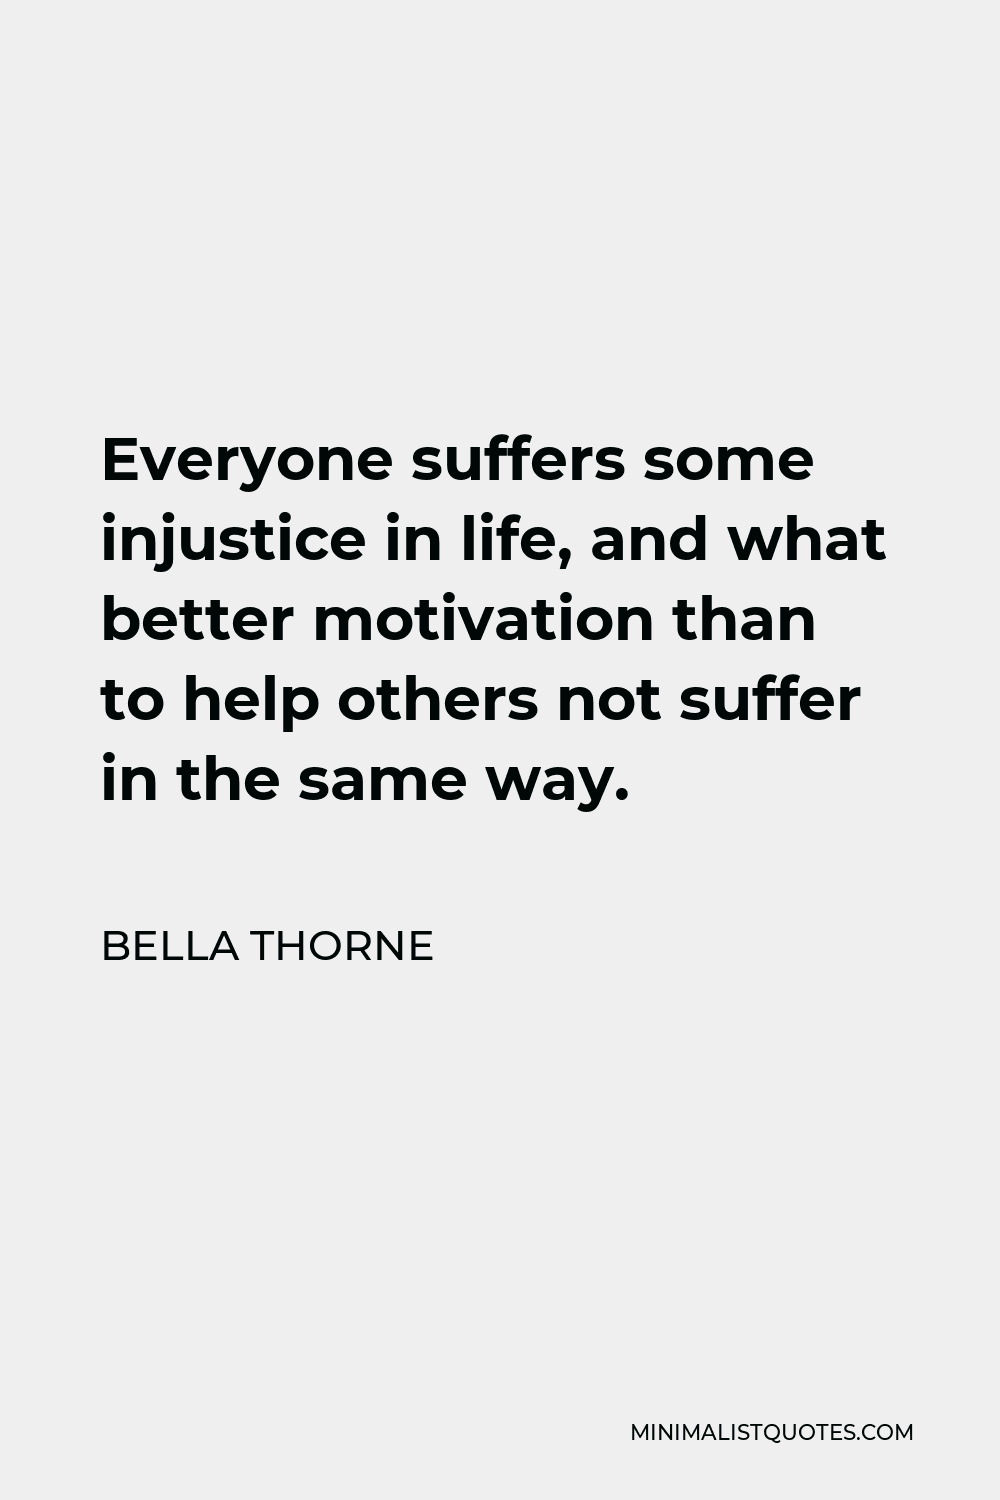 Bella Thorne Quote - Everyone suffers some injustice in life, and what better motivation than to help others not suffer in the same way.